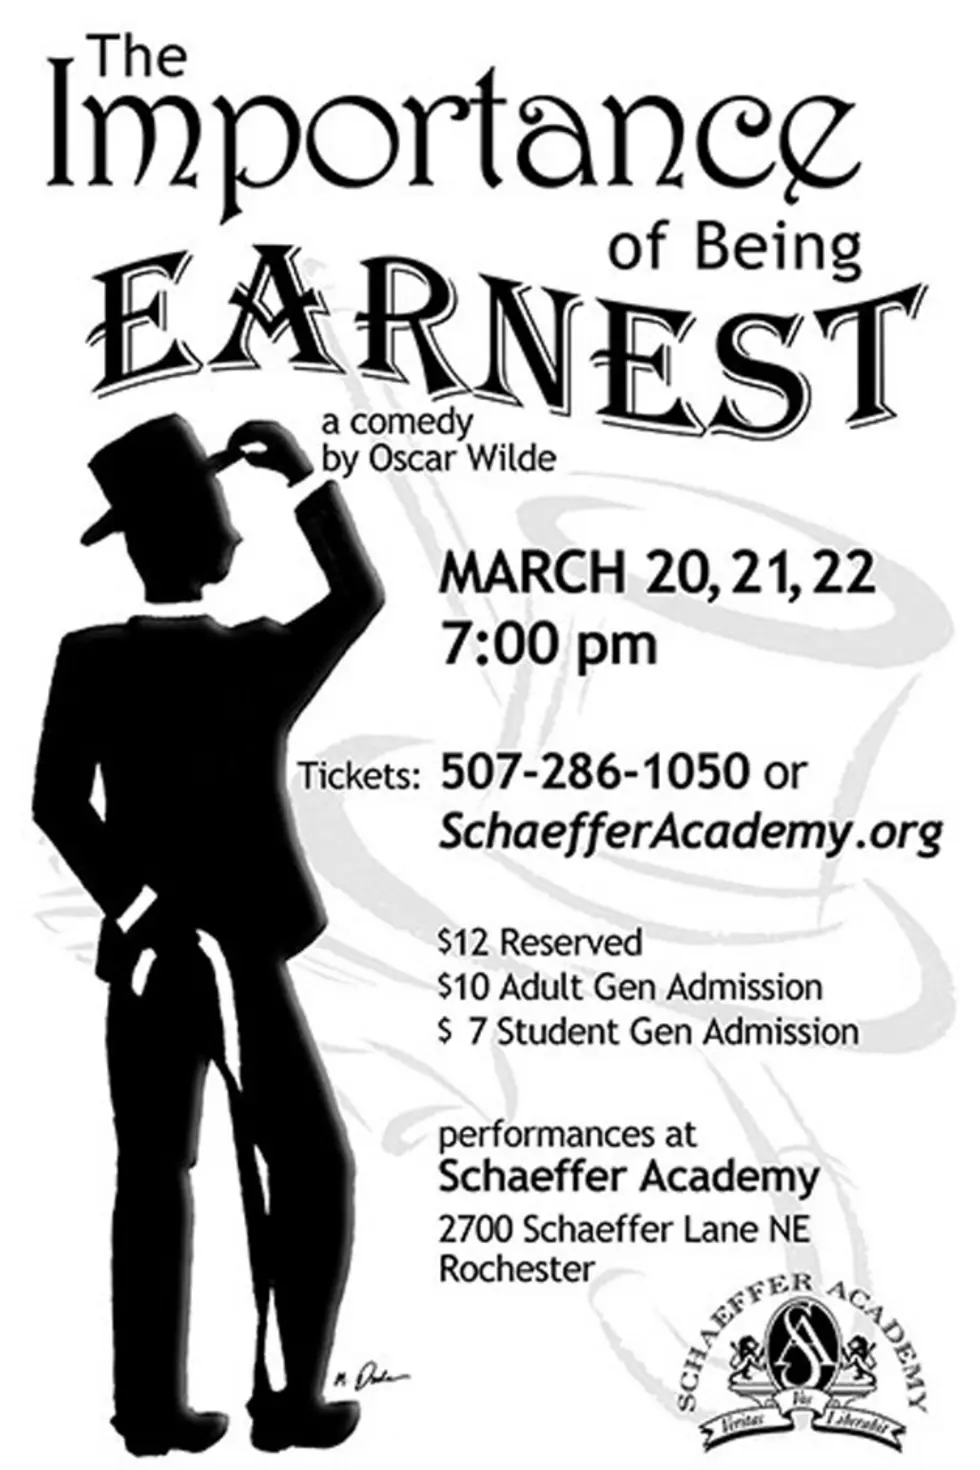 &#8216;The Importance Of Being Earnest&#8217;, A Comedy By Oscar Wilde